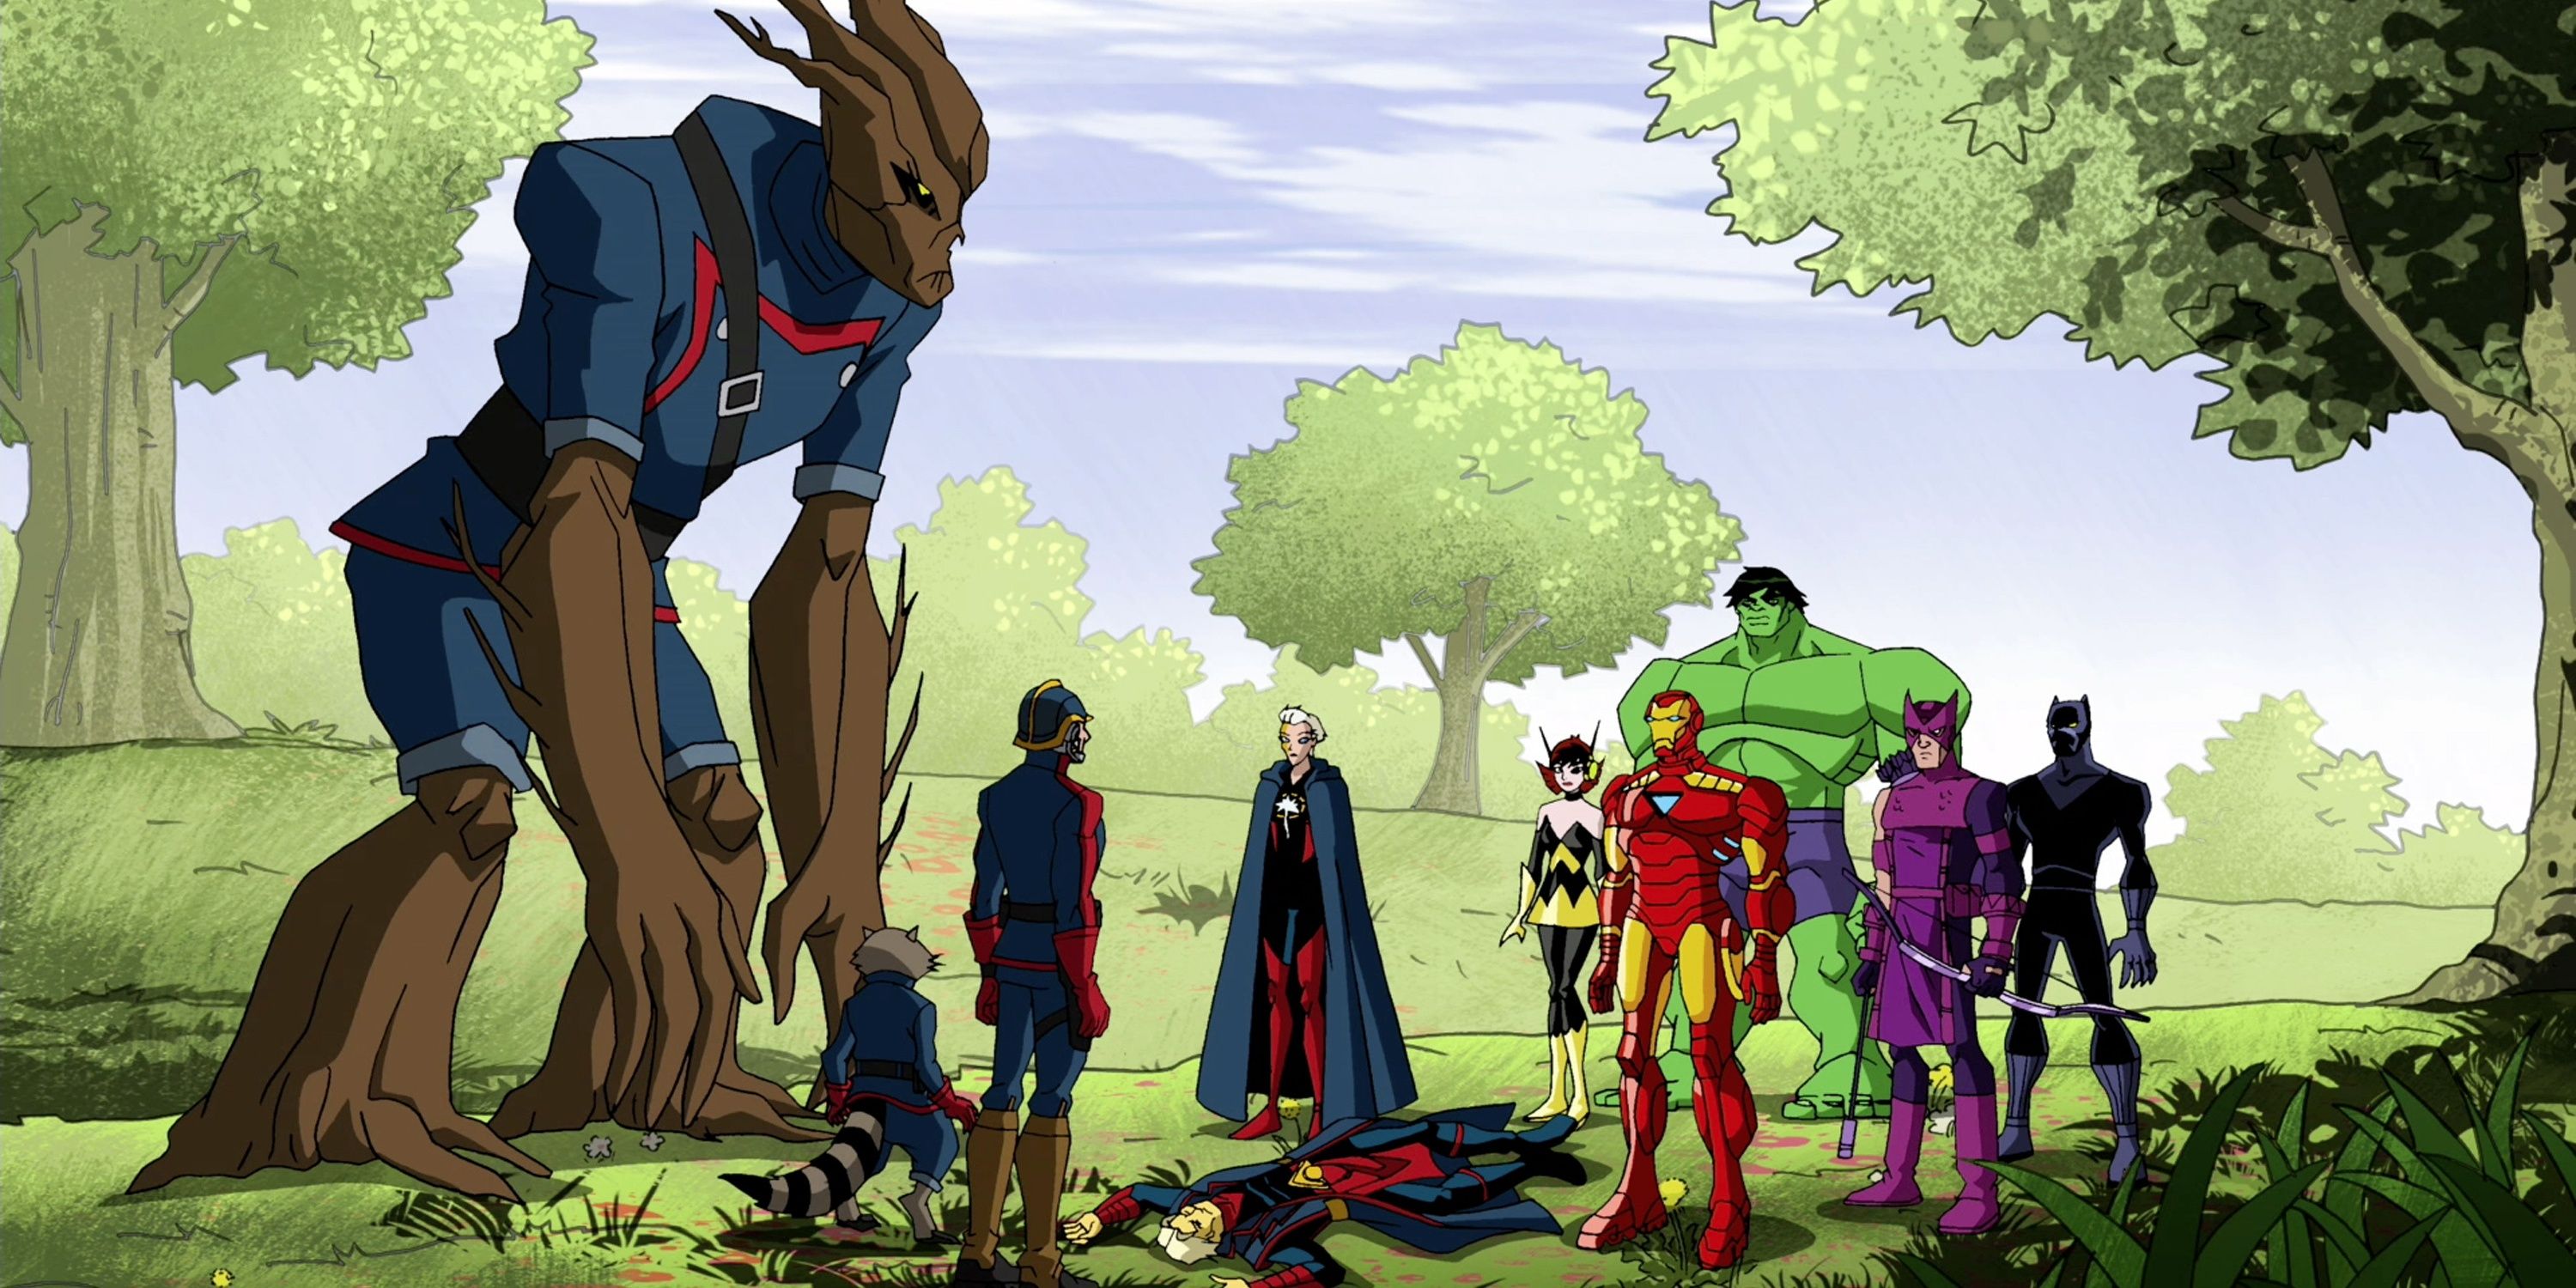 Groot messes with the Avengers in Avengers - Earth's Mightiest Heroes